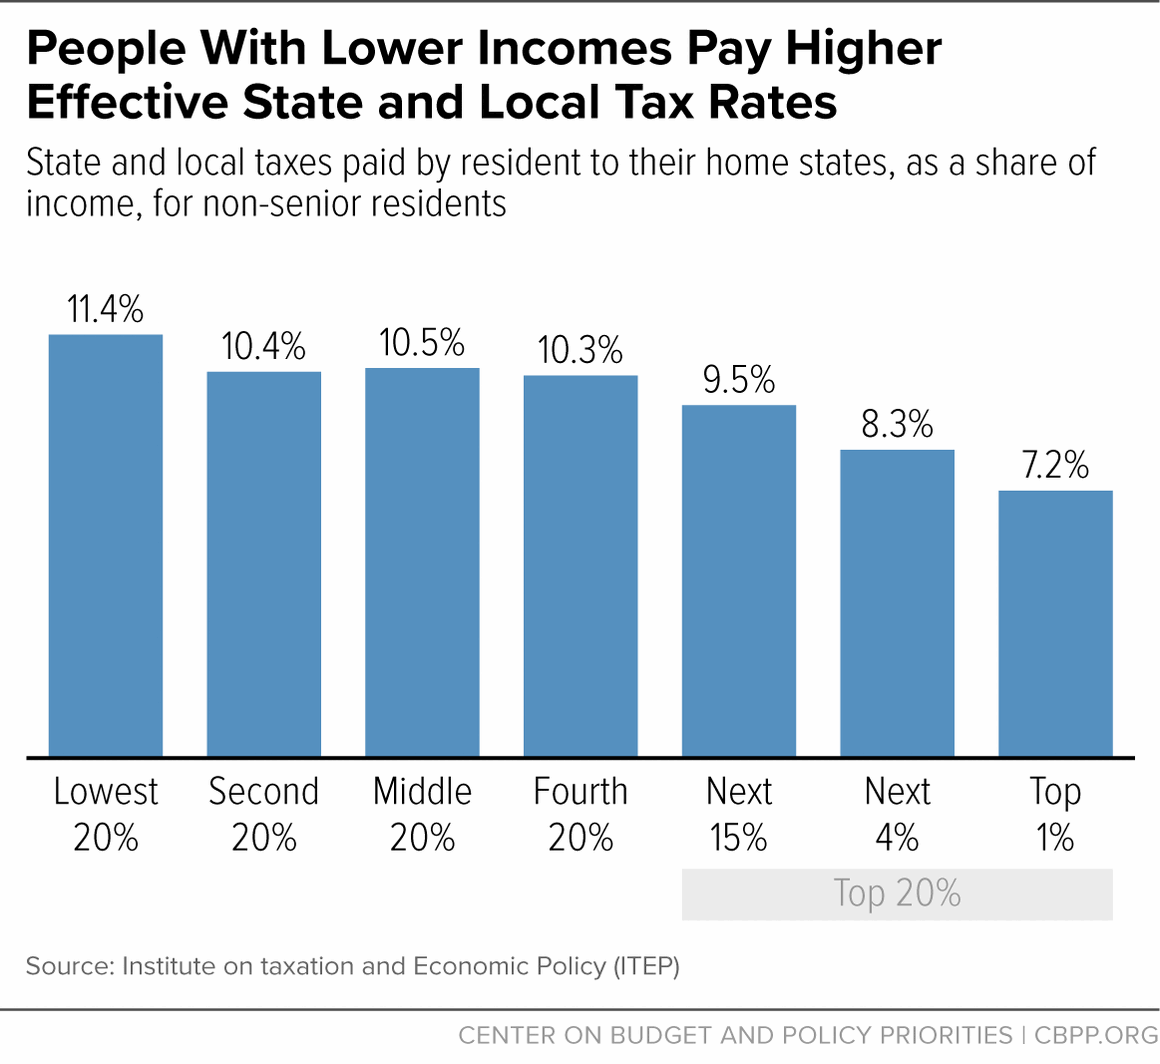 People With Lower Incomes Pay Higher Effective State and Local Tax Rates